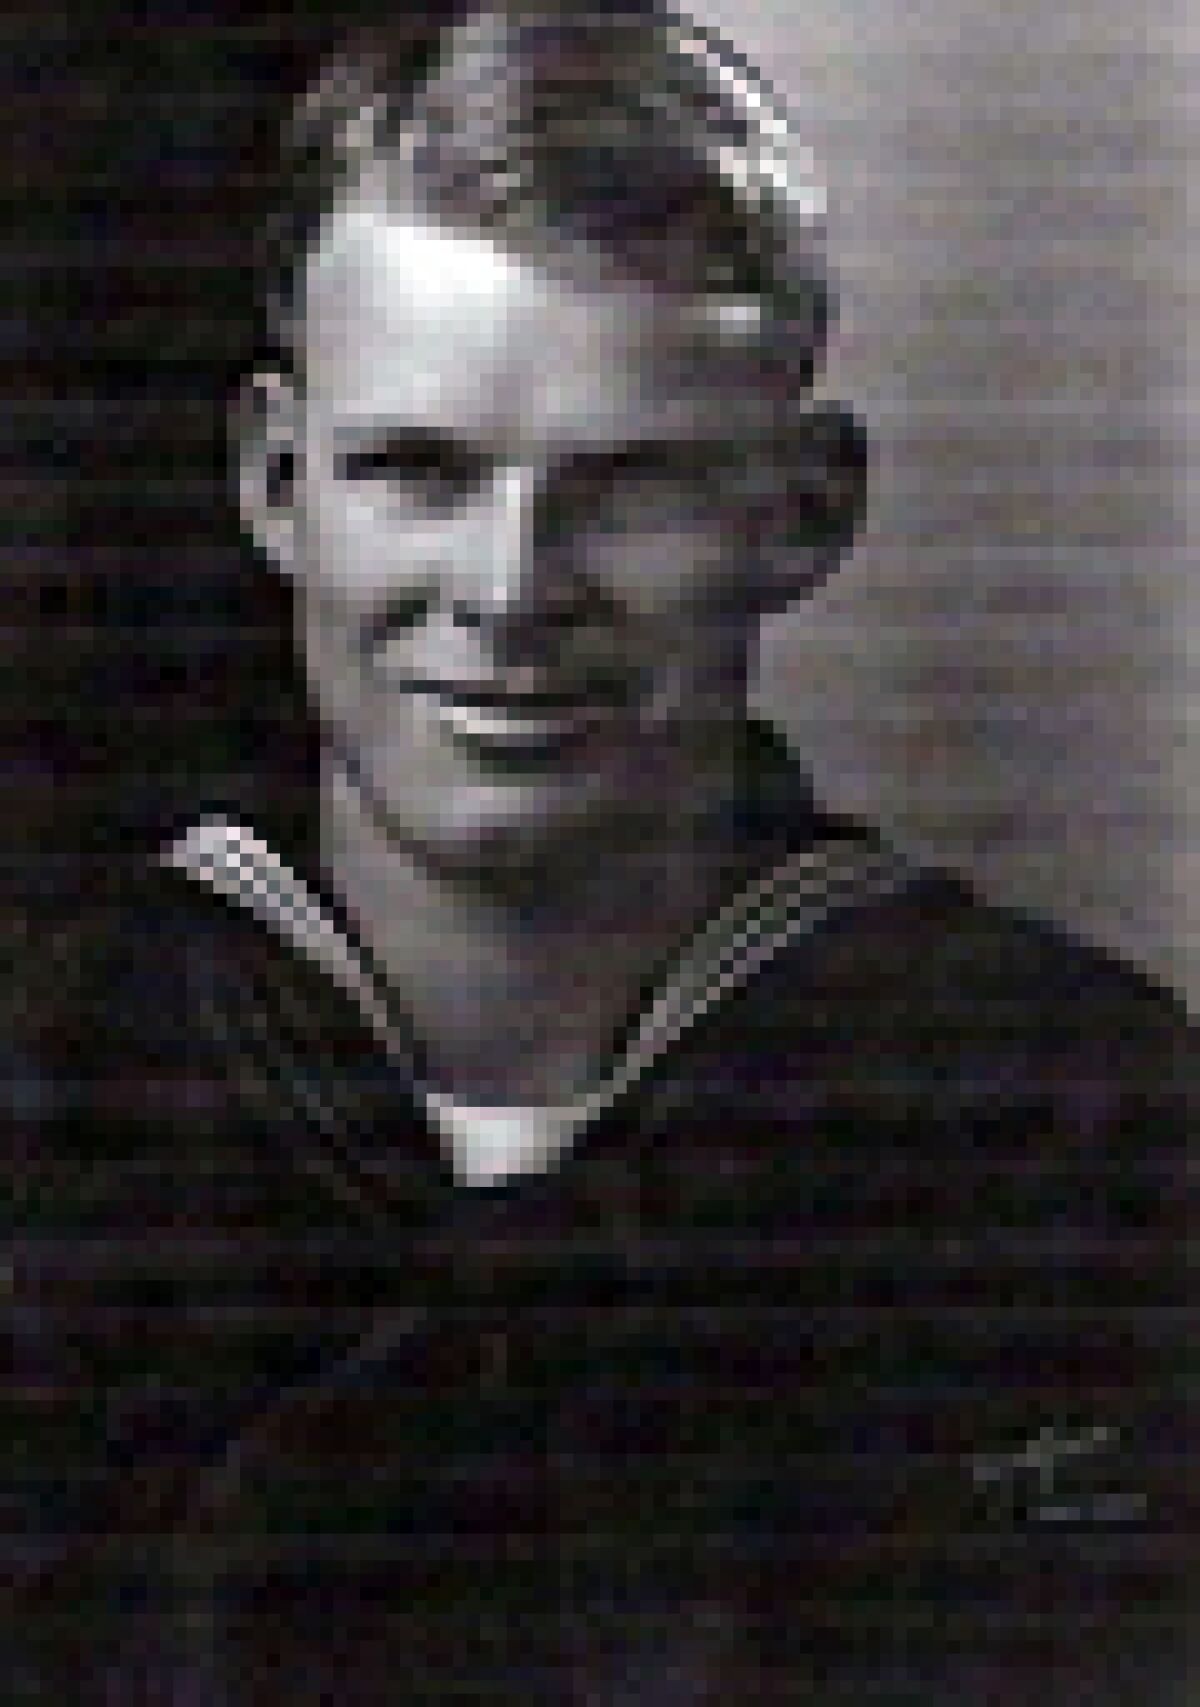 Navy coxswain Howard Carter of San Diego died on Dec. 7, 1941, in the attack on Pearl Harbor.